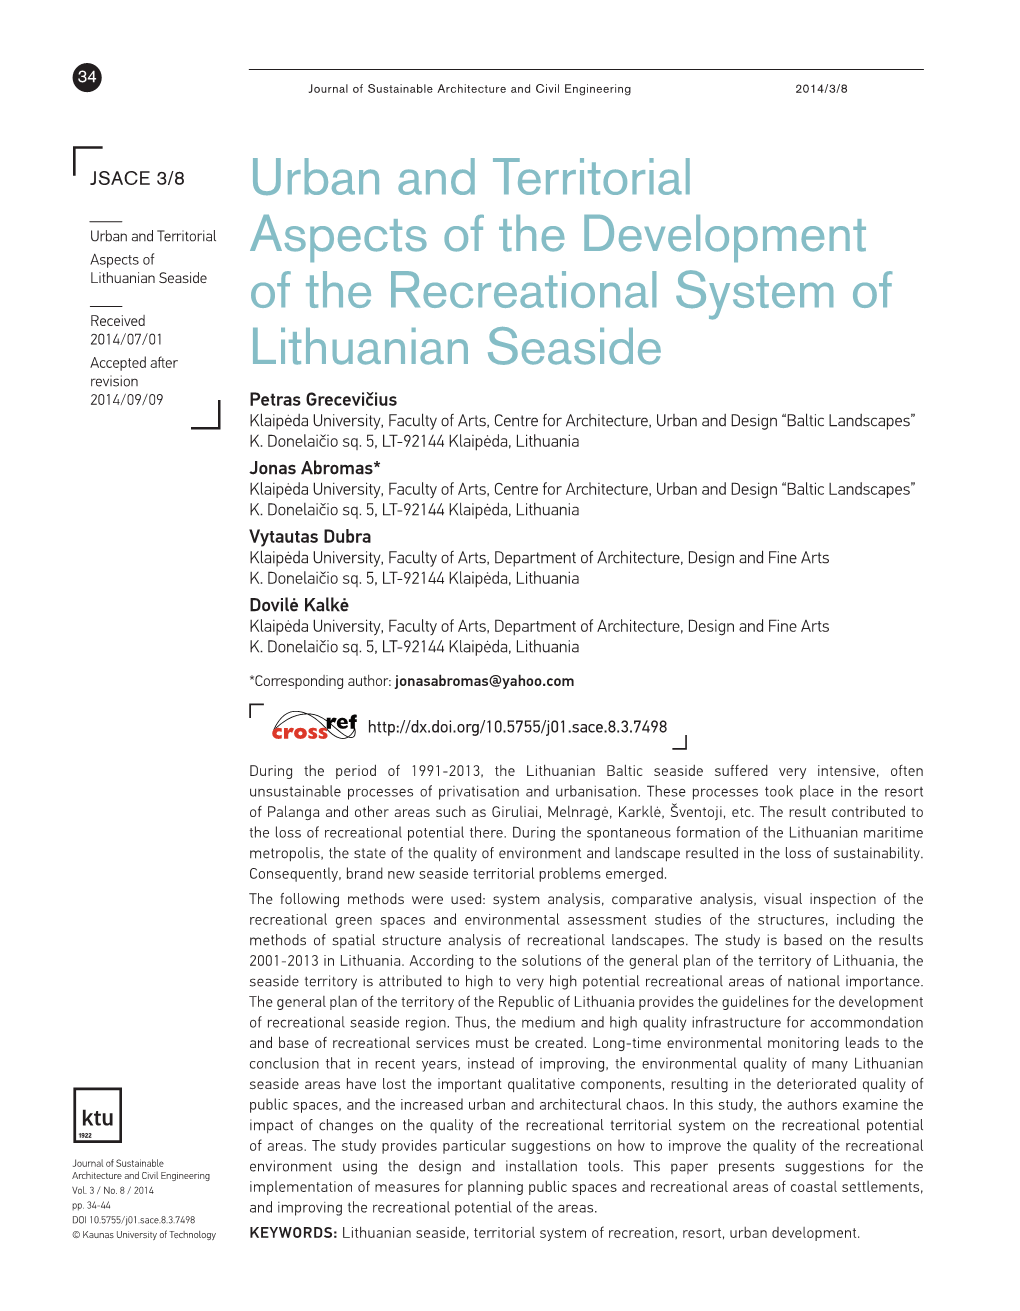 Urban and Territorial Aspects of the Development of the Recreational System of Lithuanian Seaside